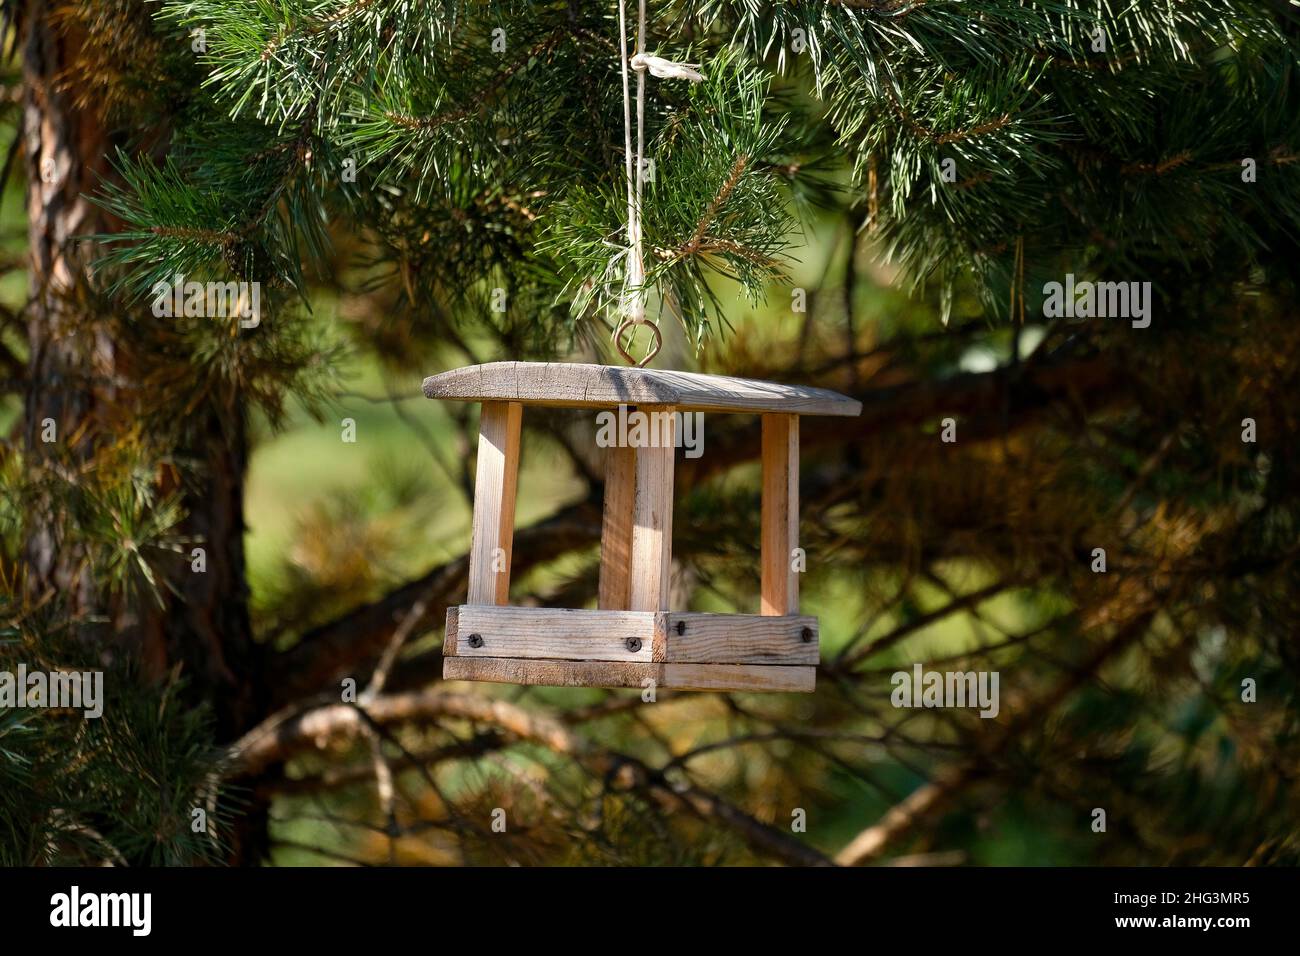 Wooden bird feeder hanging on a pine tree close up. Stock Photo